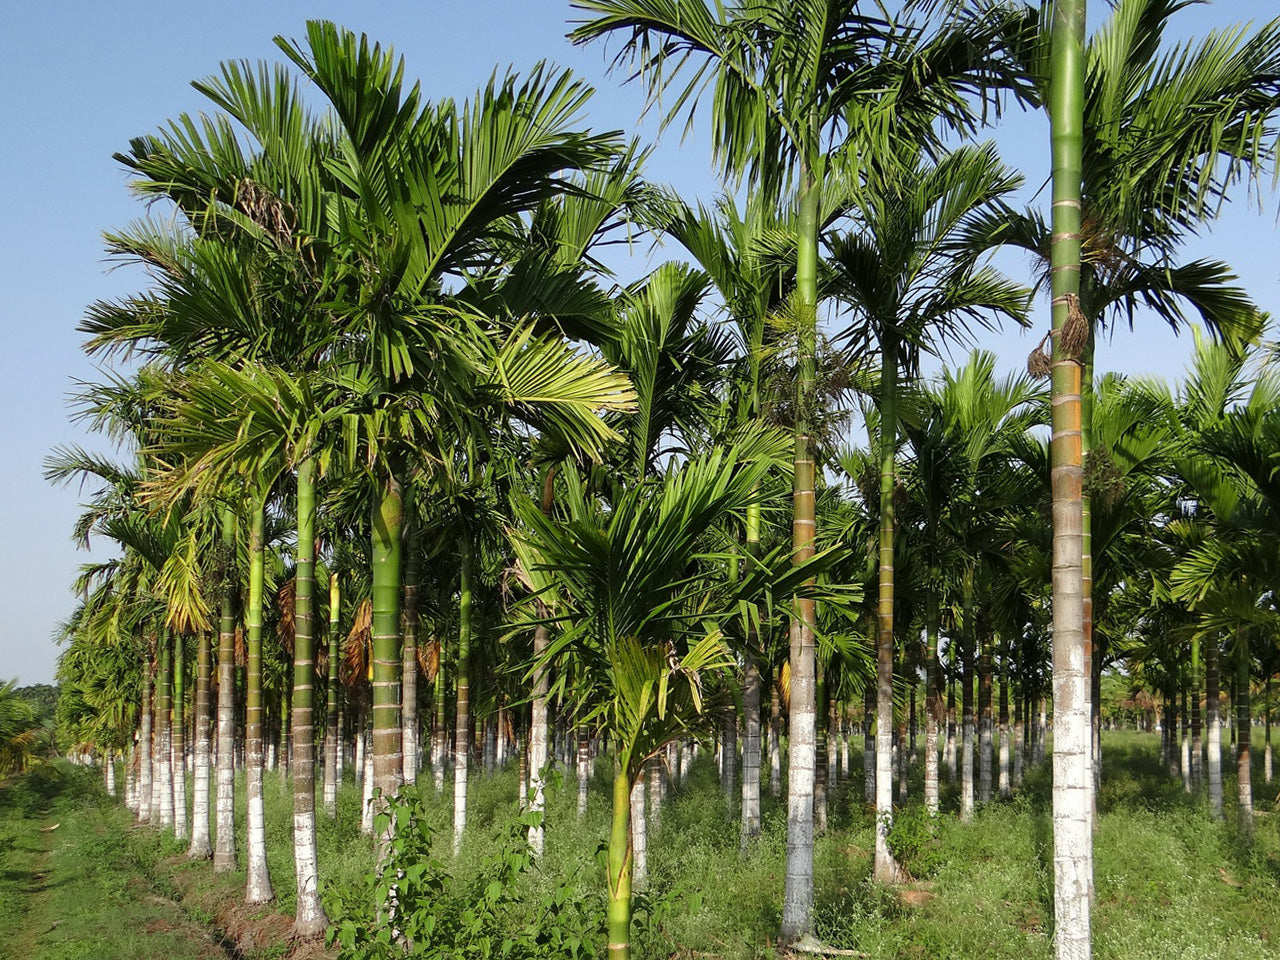 Grove of palm trees